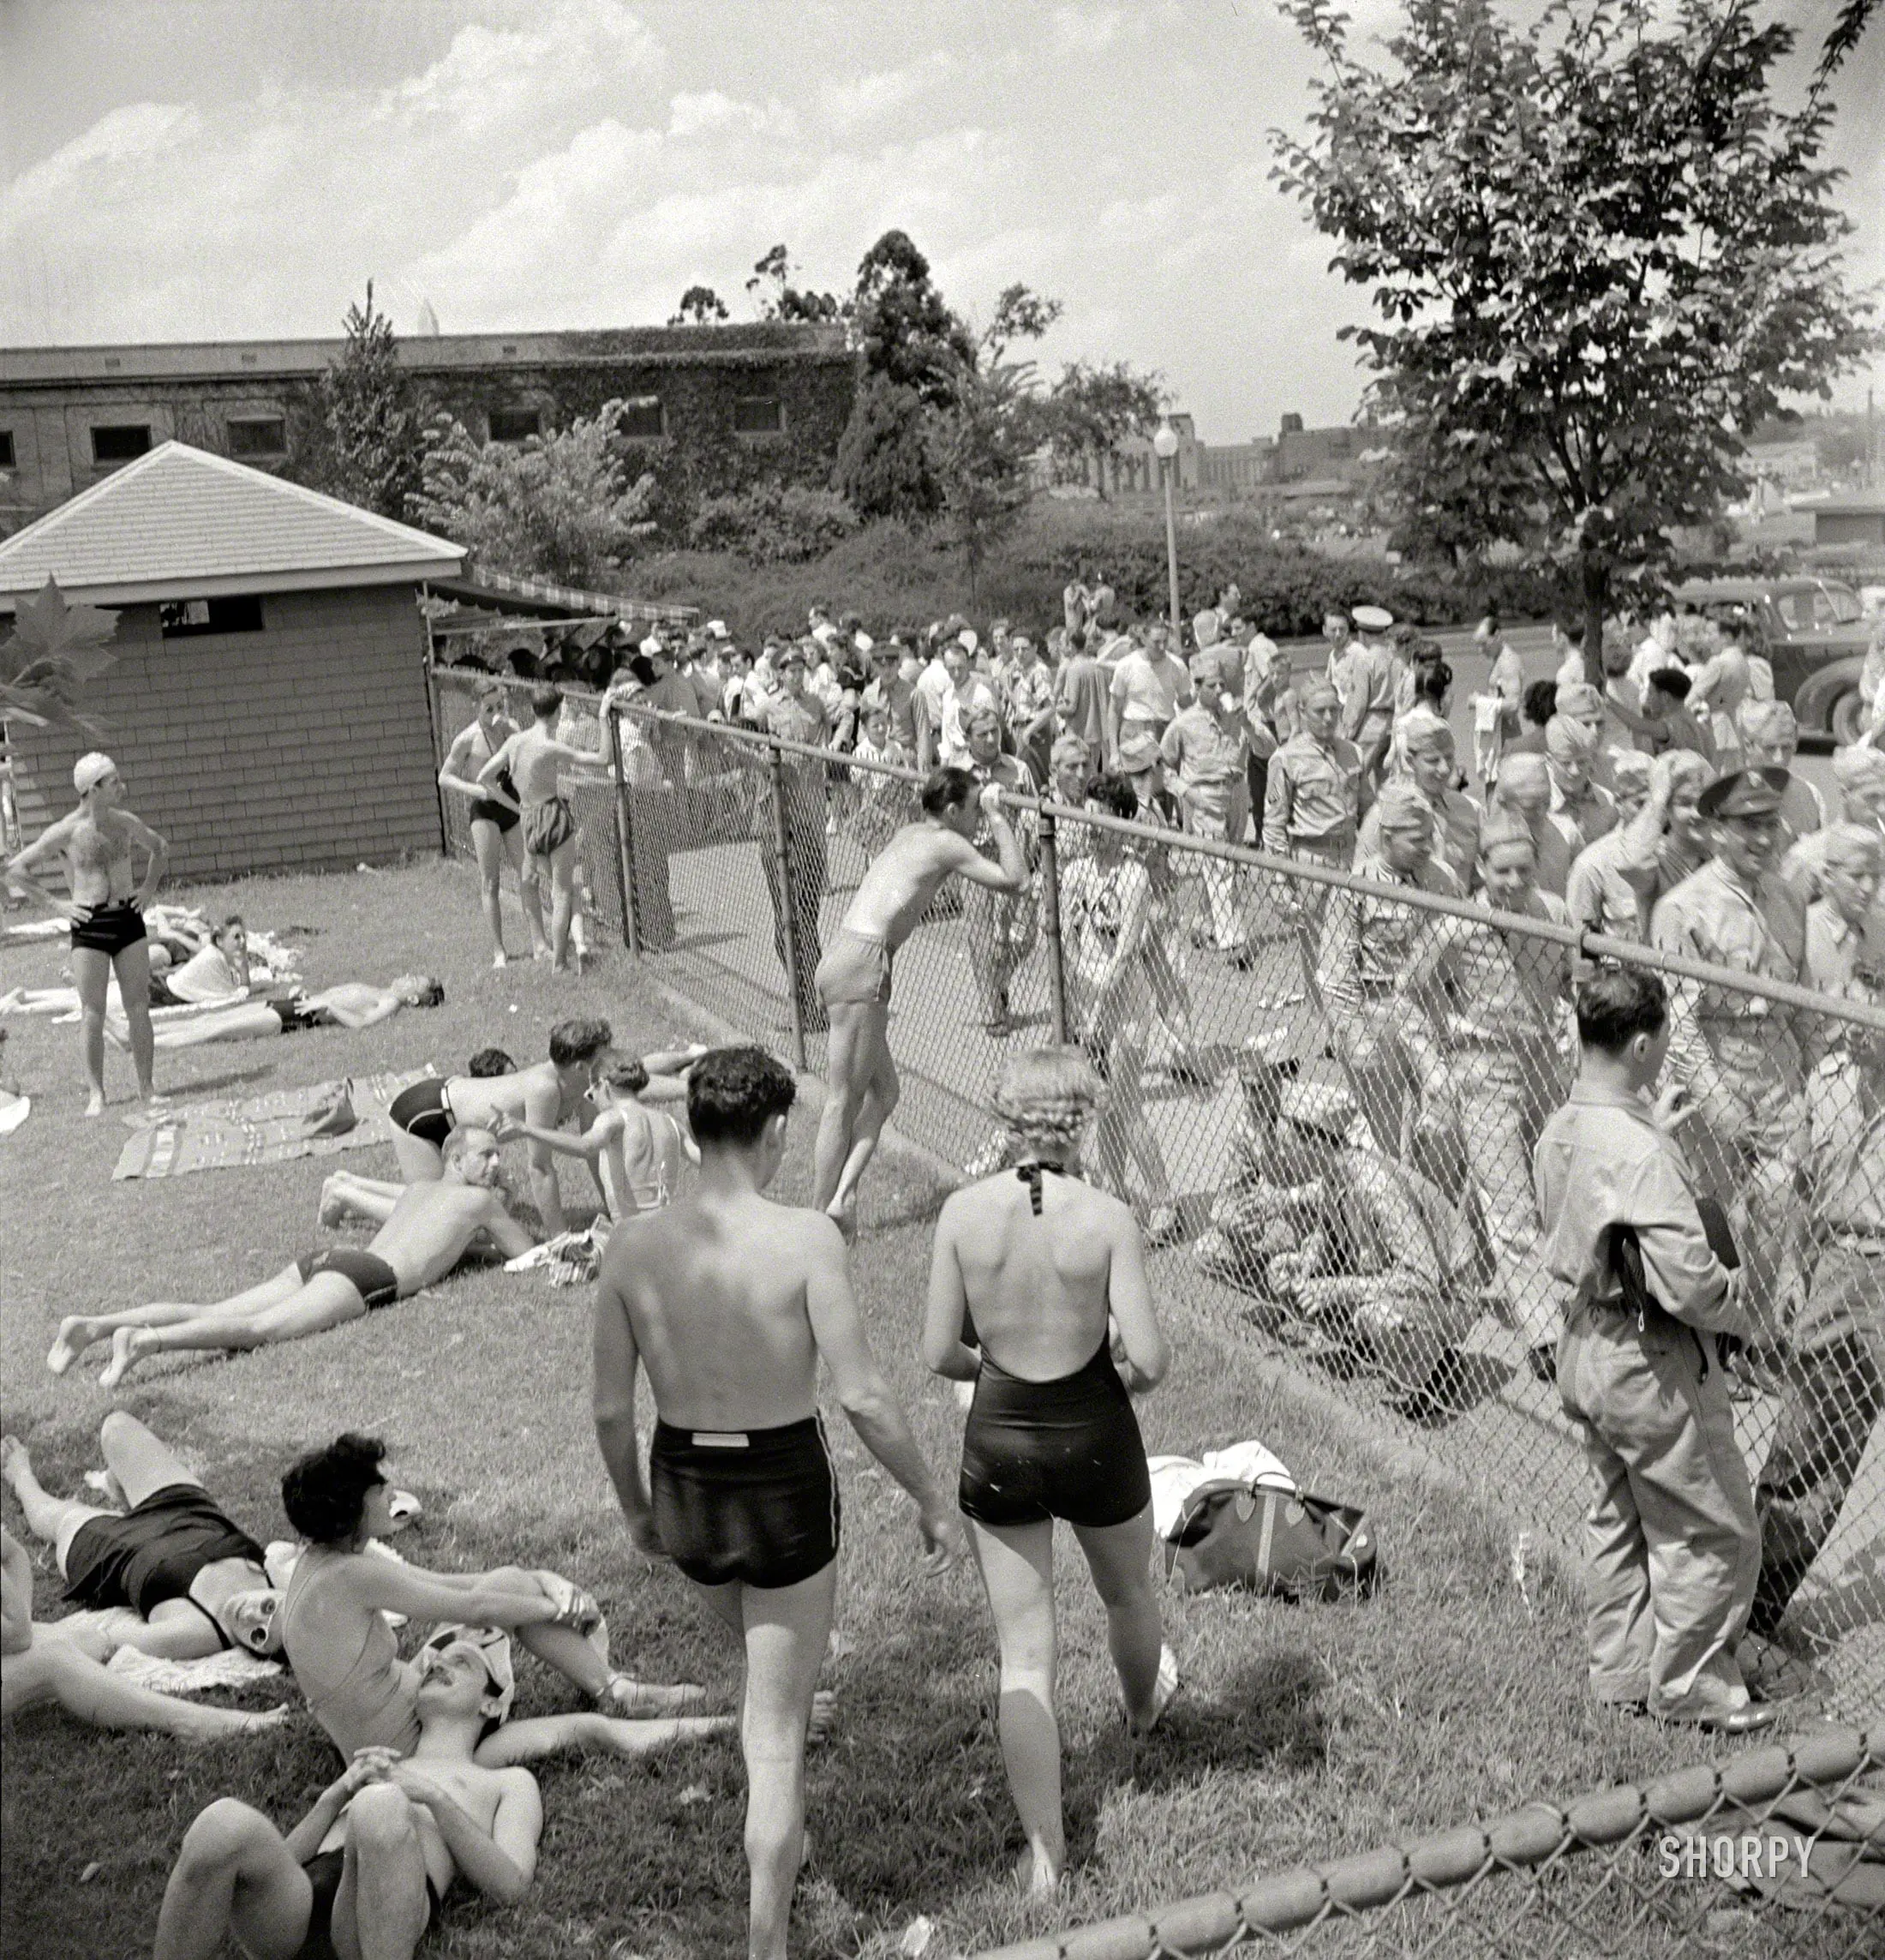 July 1942. "Sunbathers on the grass next to the municipal swimming pool on Sunday." The pasty white underbelly of wartime Washington. Medium format negative by Marjory Collins for the Office of War Information.